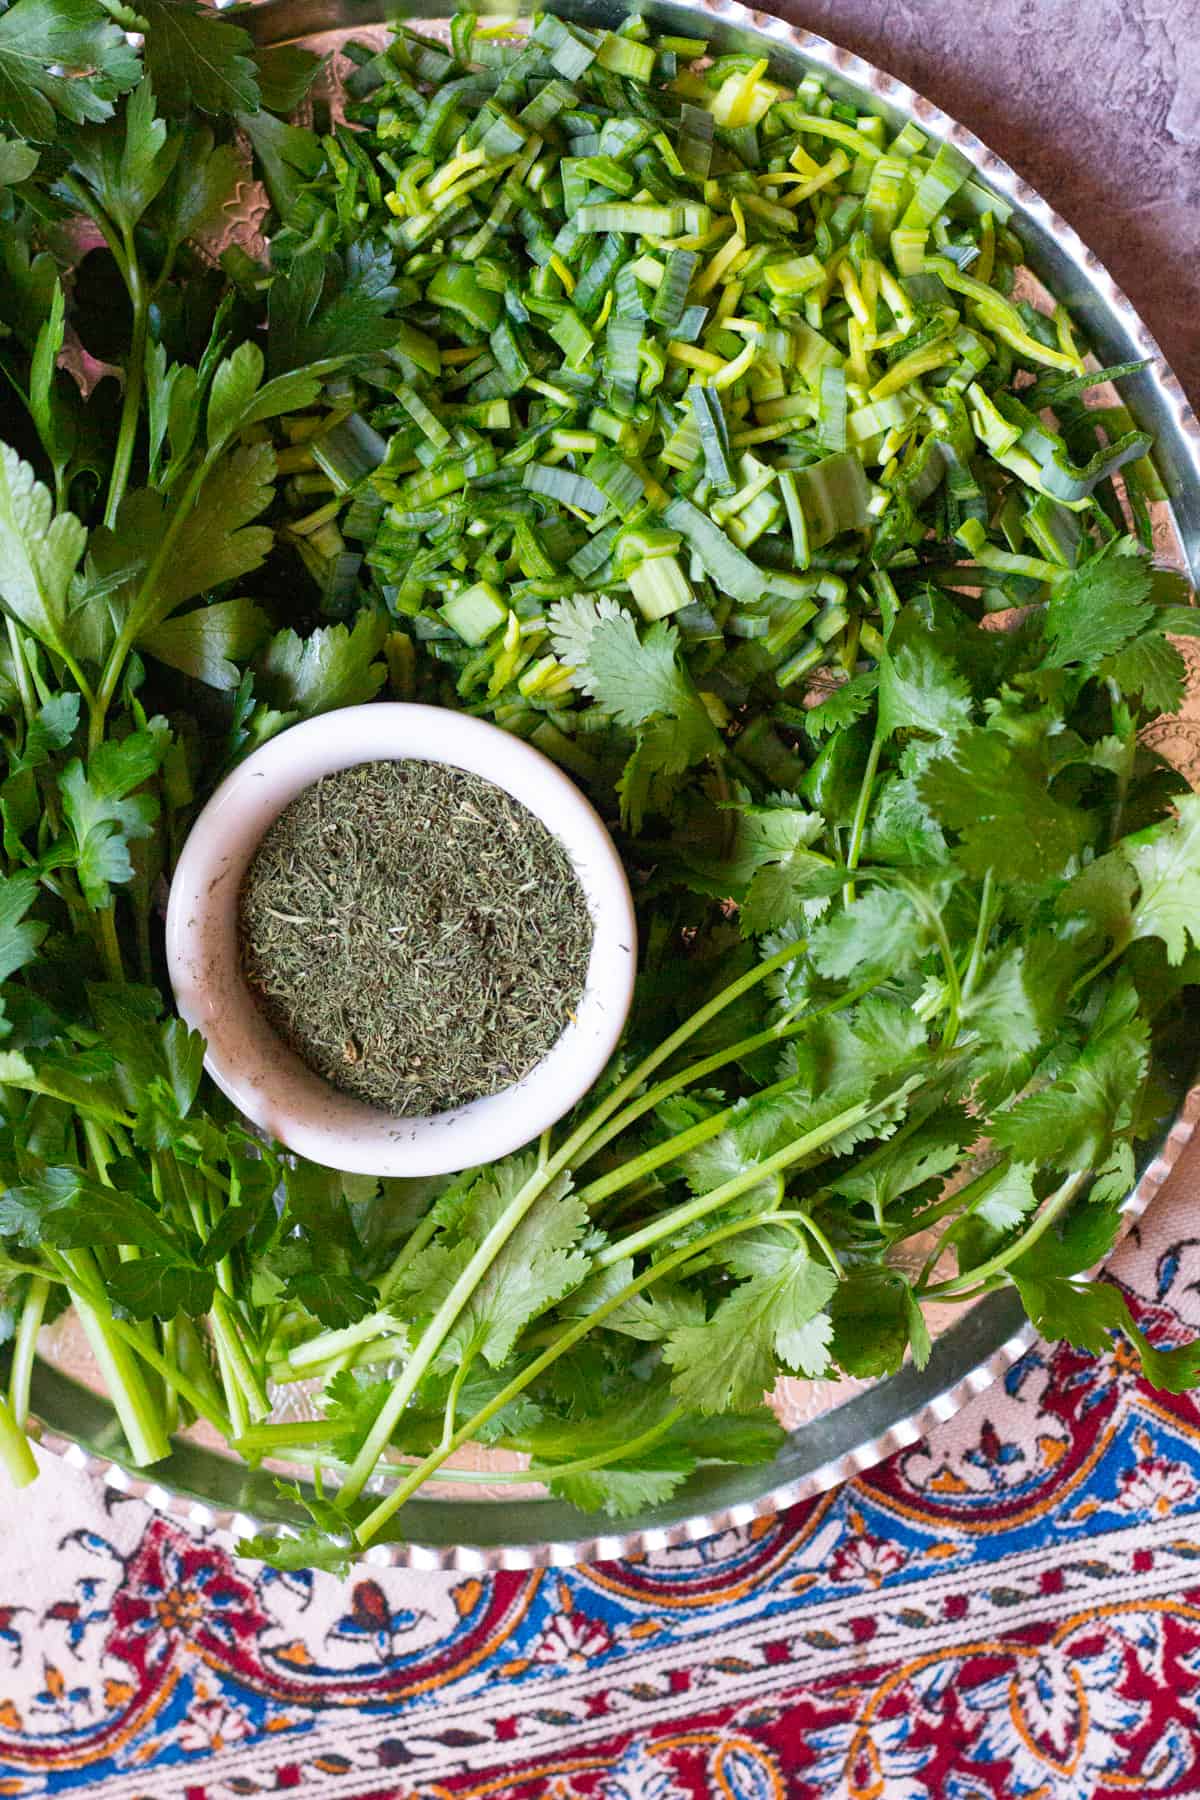 Herbs used in Sabzi Polo are leeks, cilantro, parsley and dill. You can use fresh or dried herbs. 